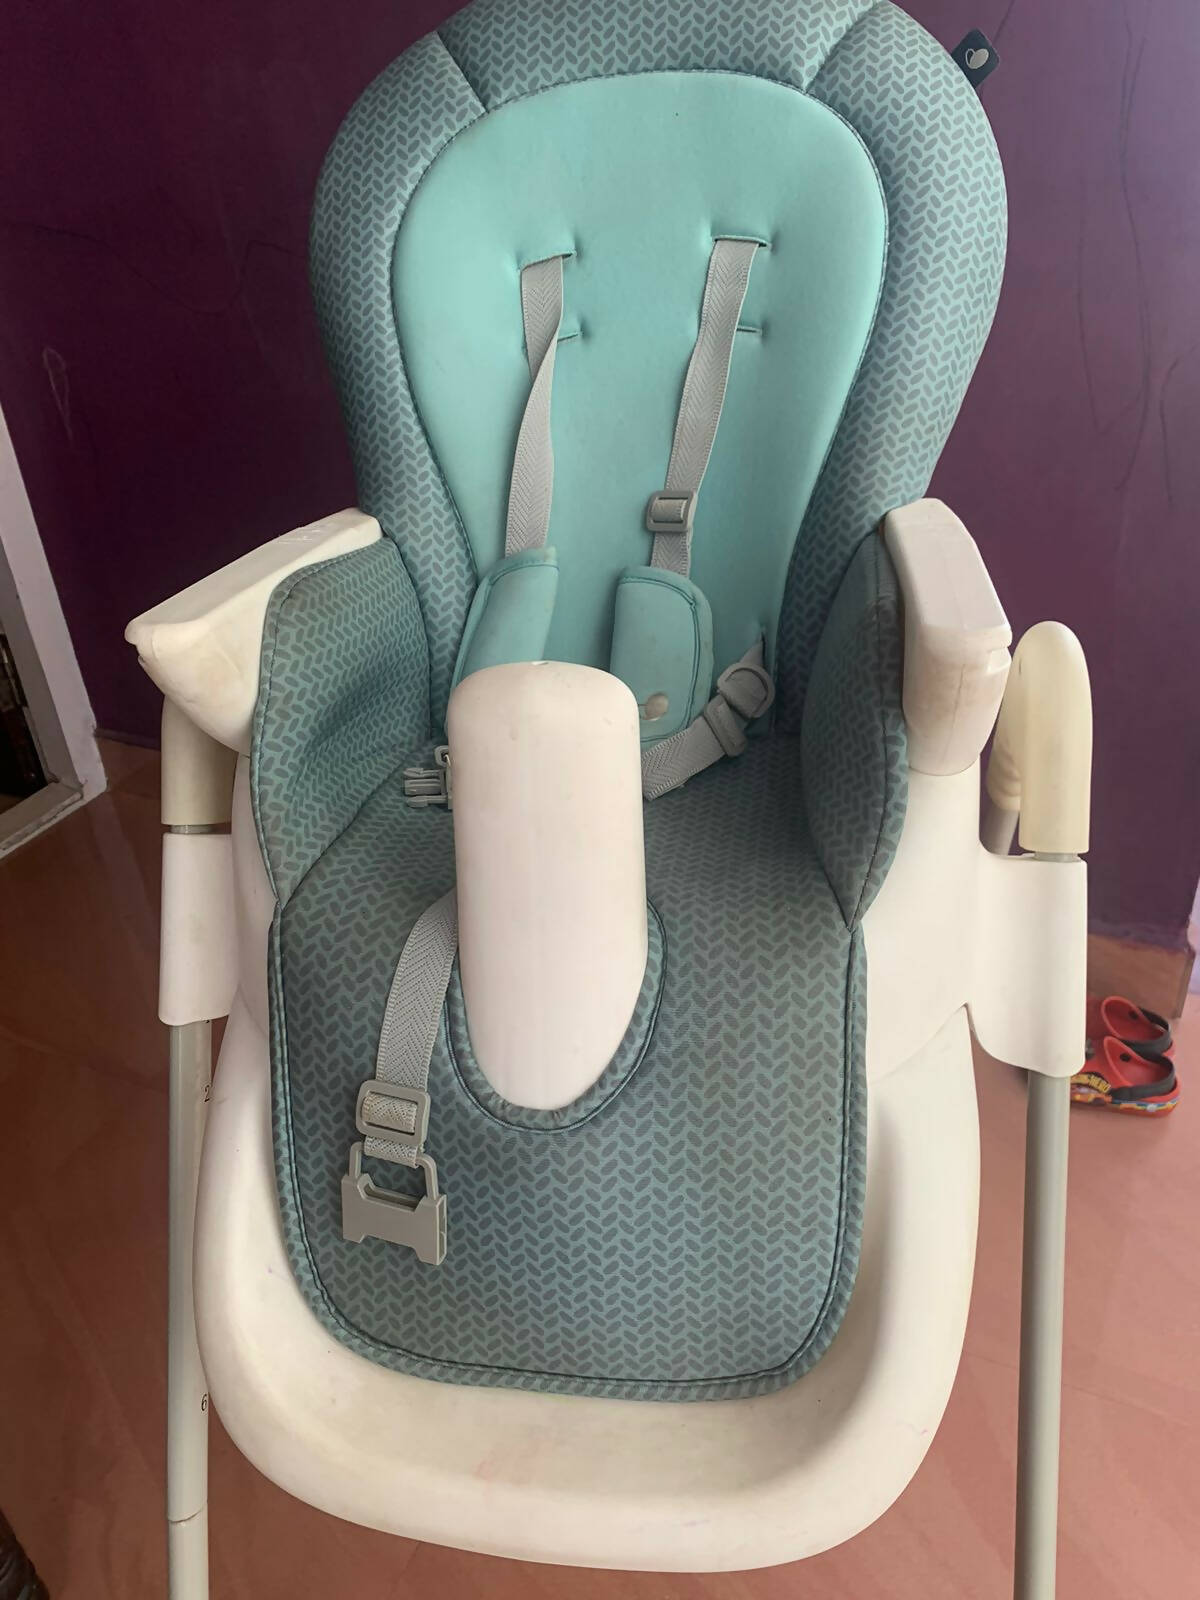 MOTHERCARE Evenflo Fava Full Functional Baby High Chair - Blue